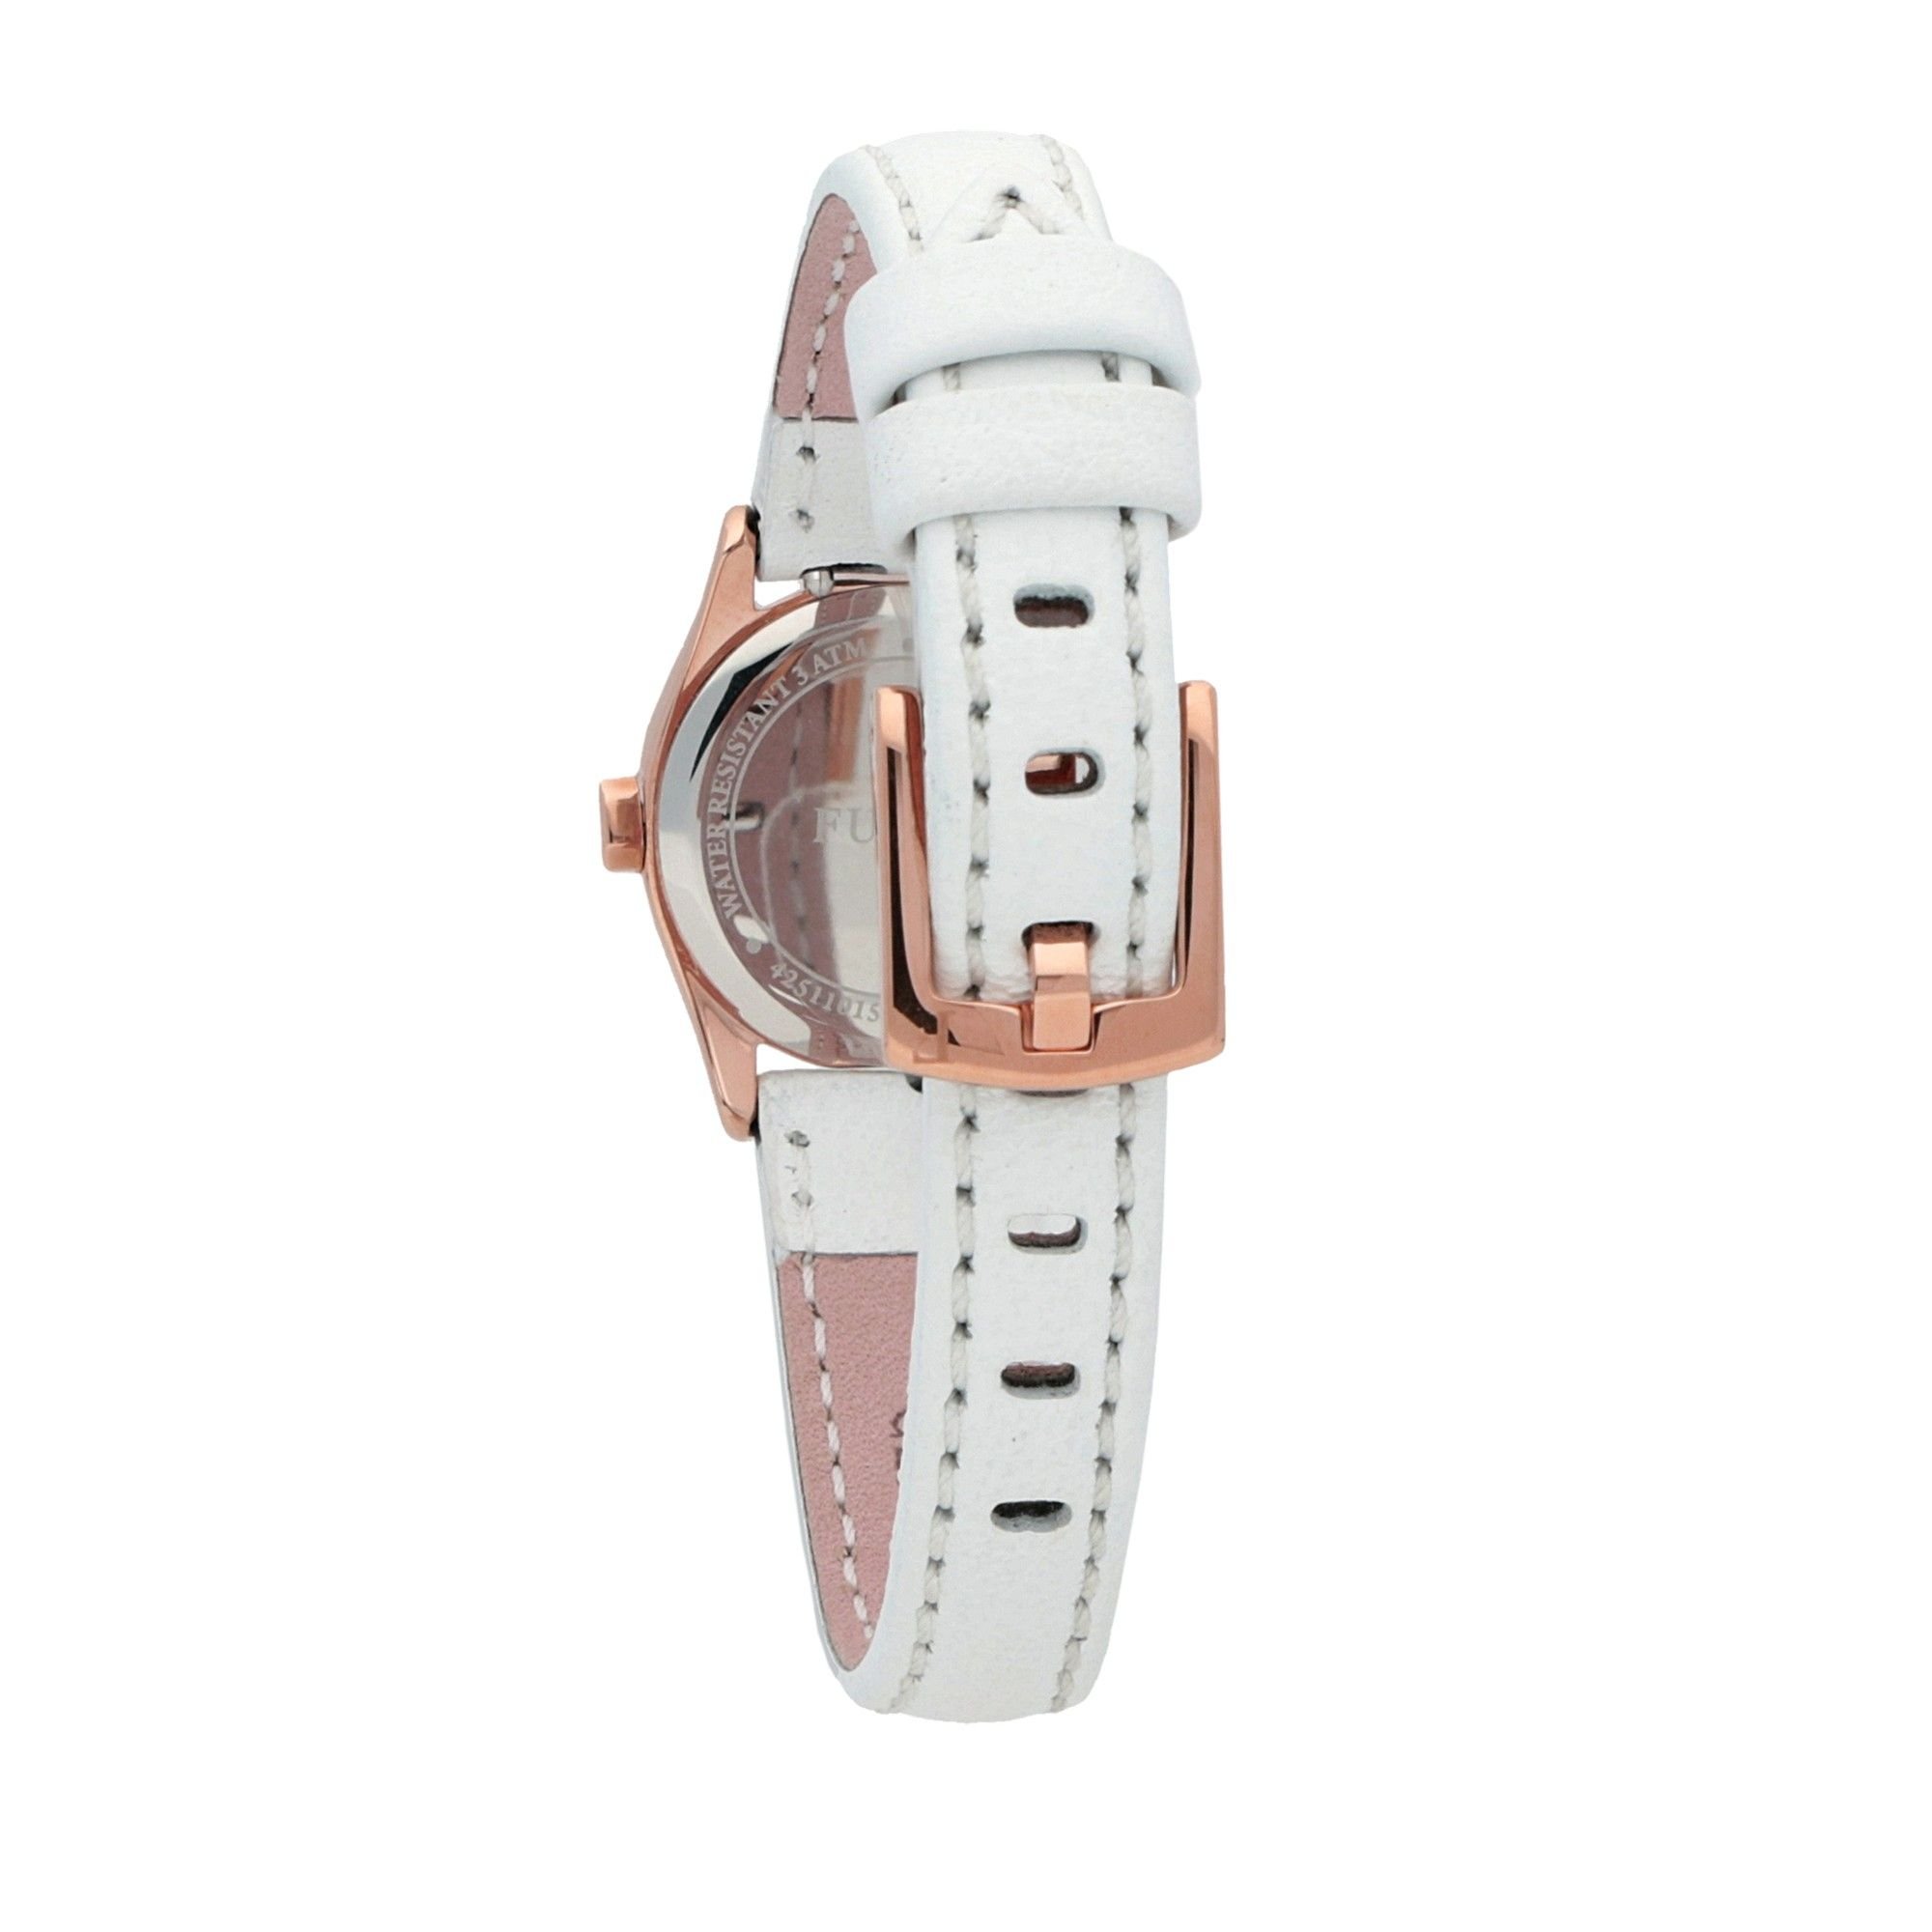 Furla Women's Stainless Steel Quartz Watch with Leather Strap, White, 13 (Model: R4251101505)